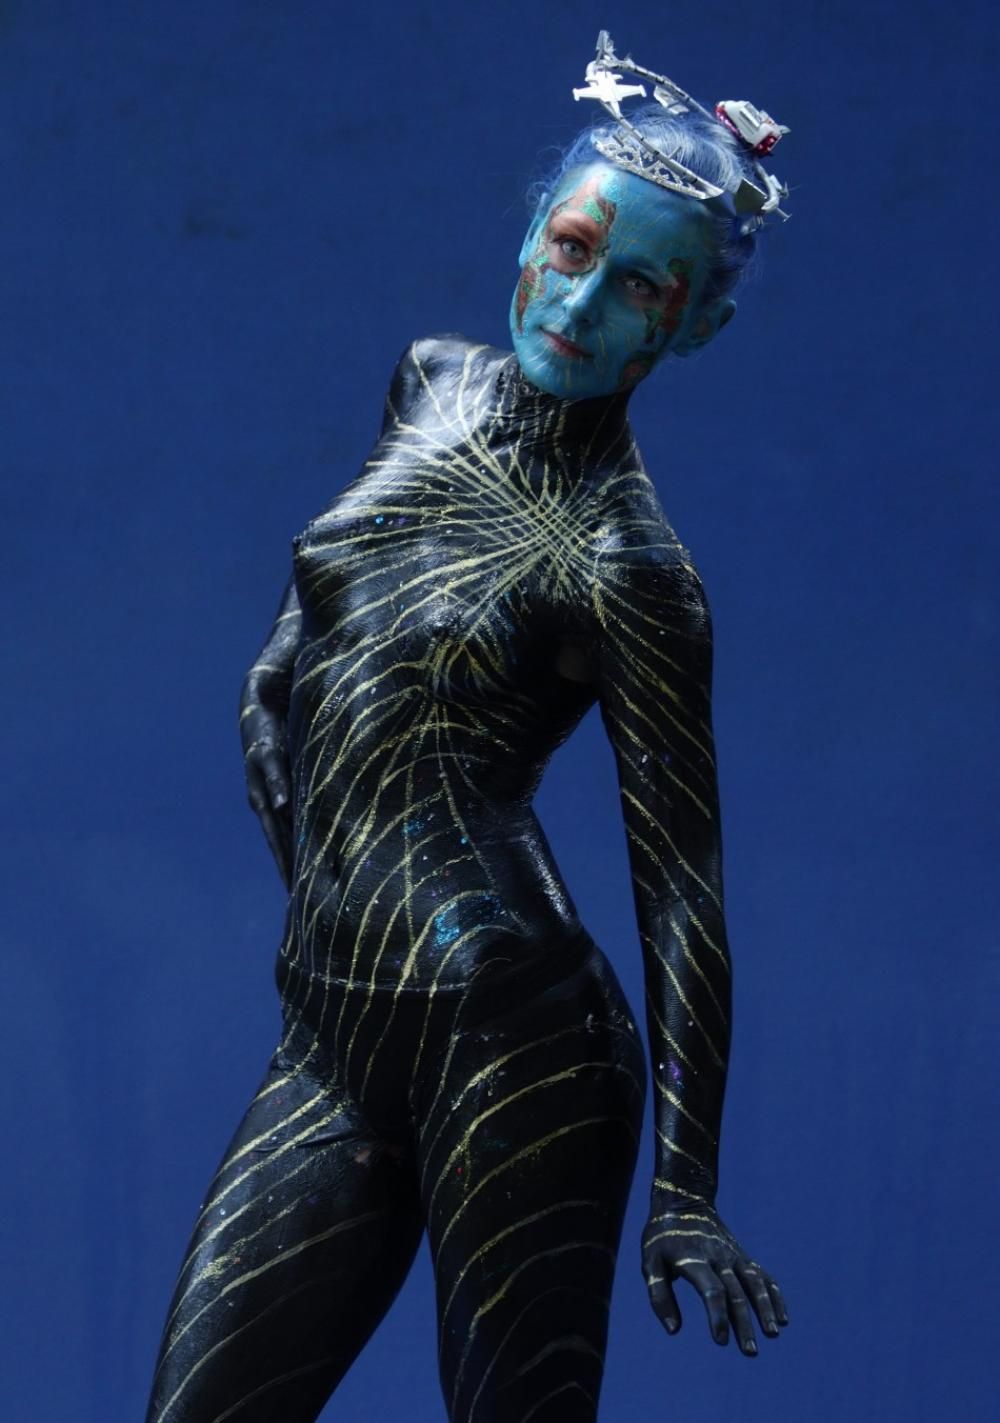 124390-a-models-poses-during-the-annual-world-bodypainting-festival-in-poerts